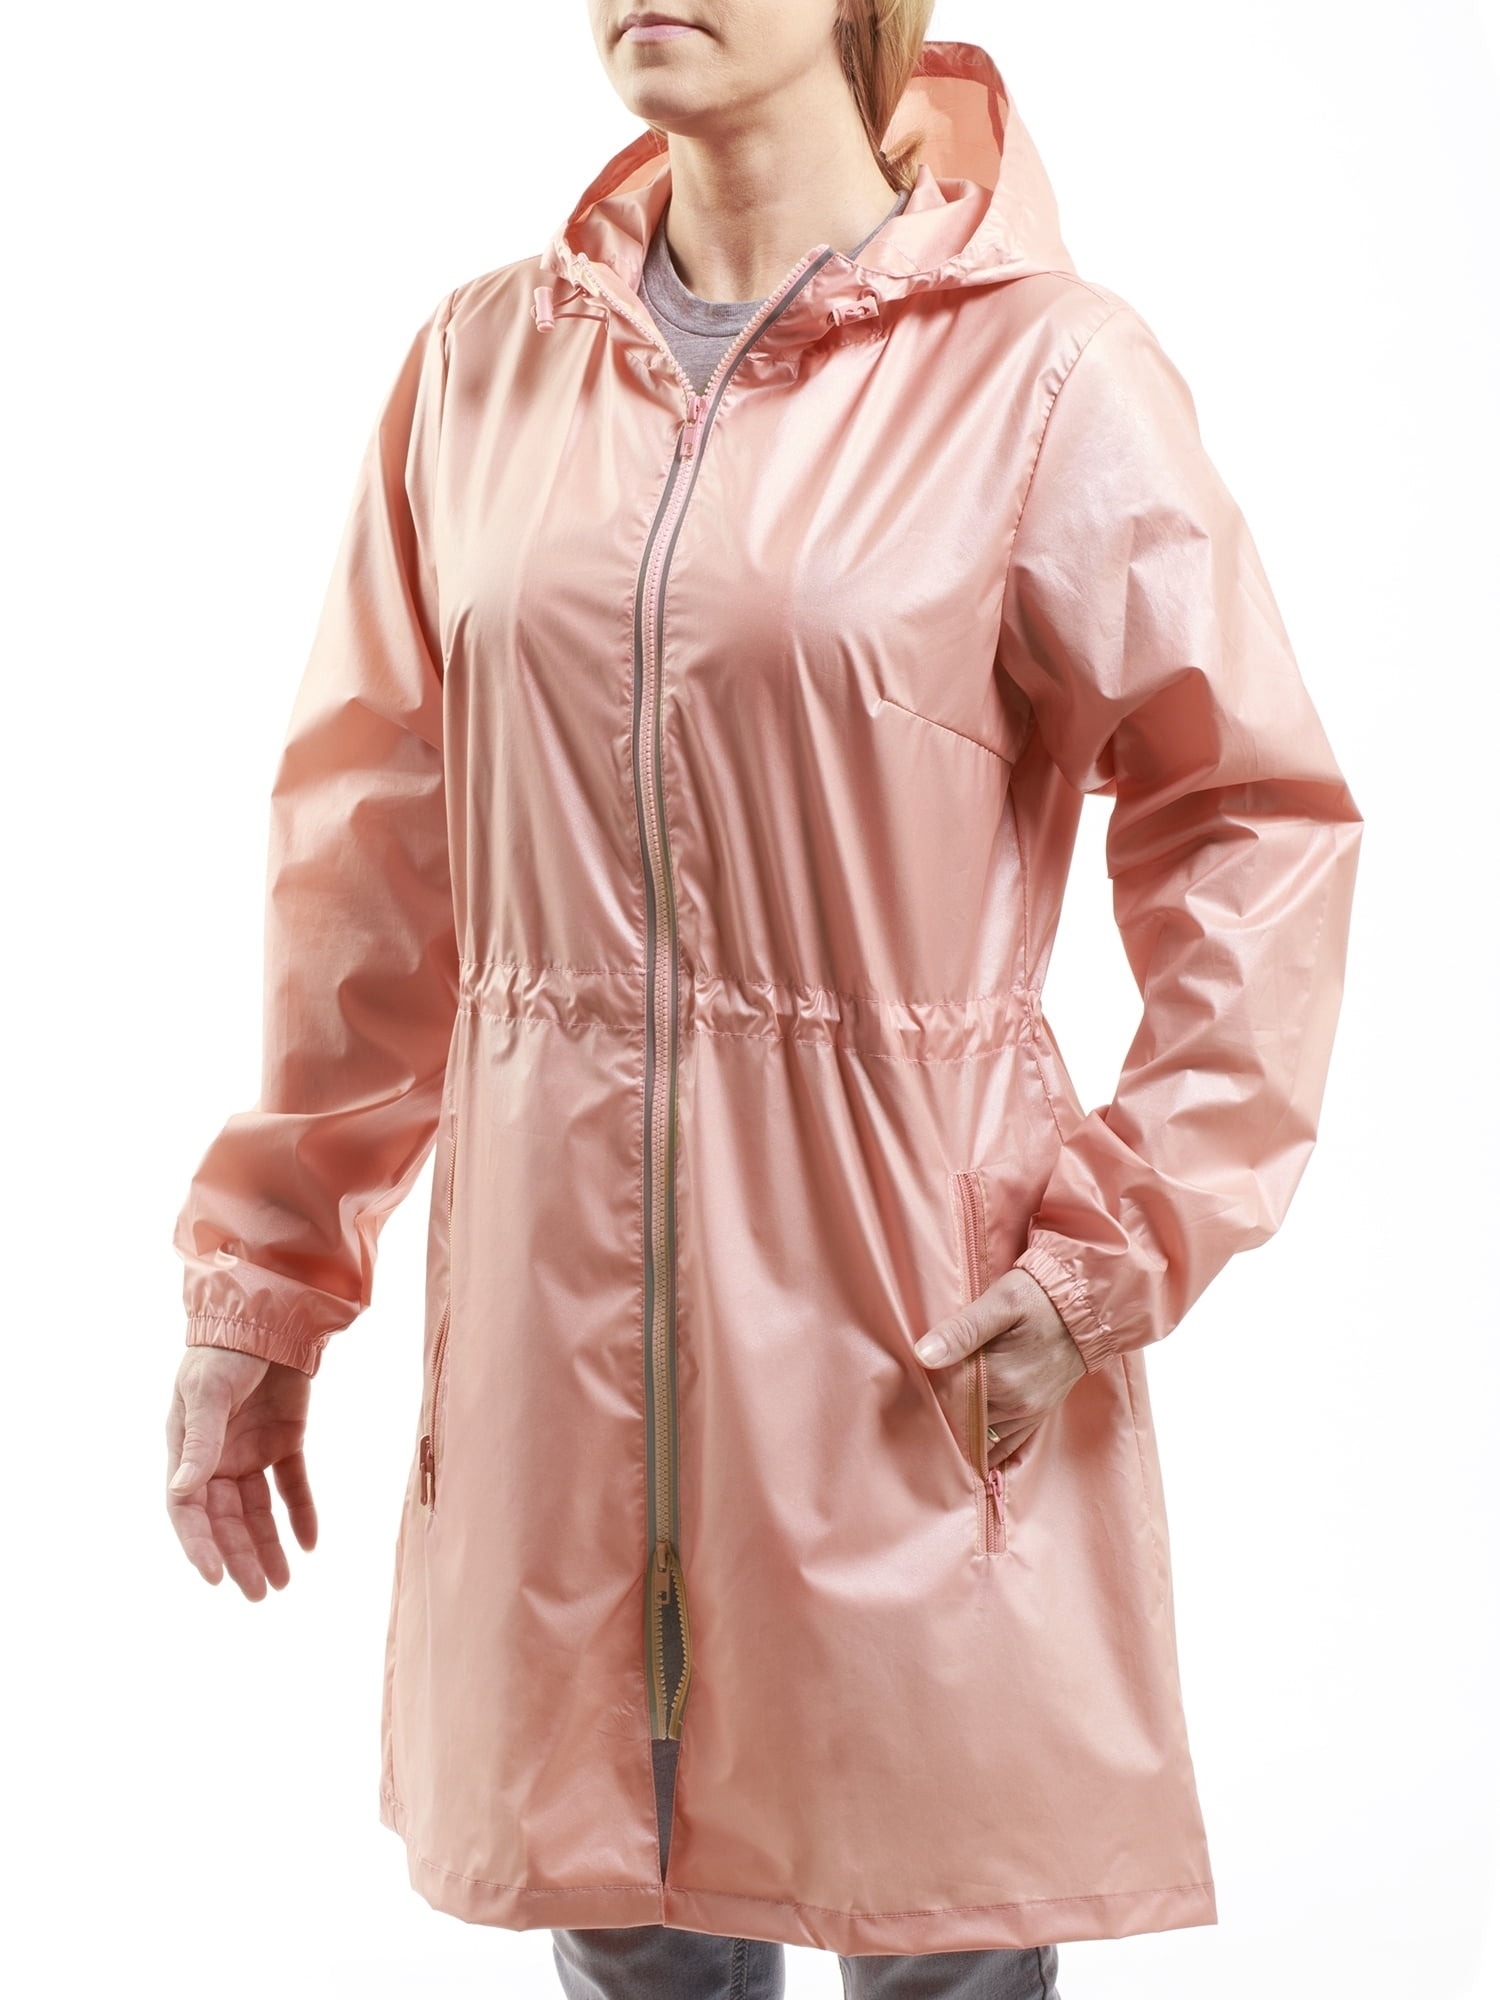 Person modeling a mid-length, hooded raincoat with a zipper closure